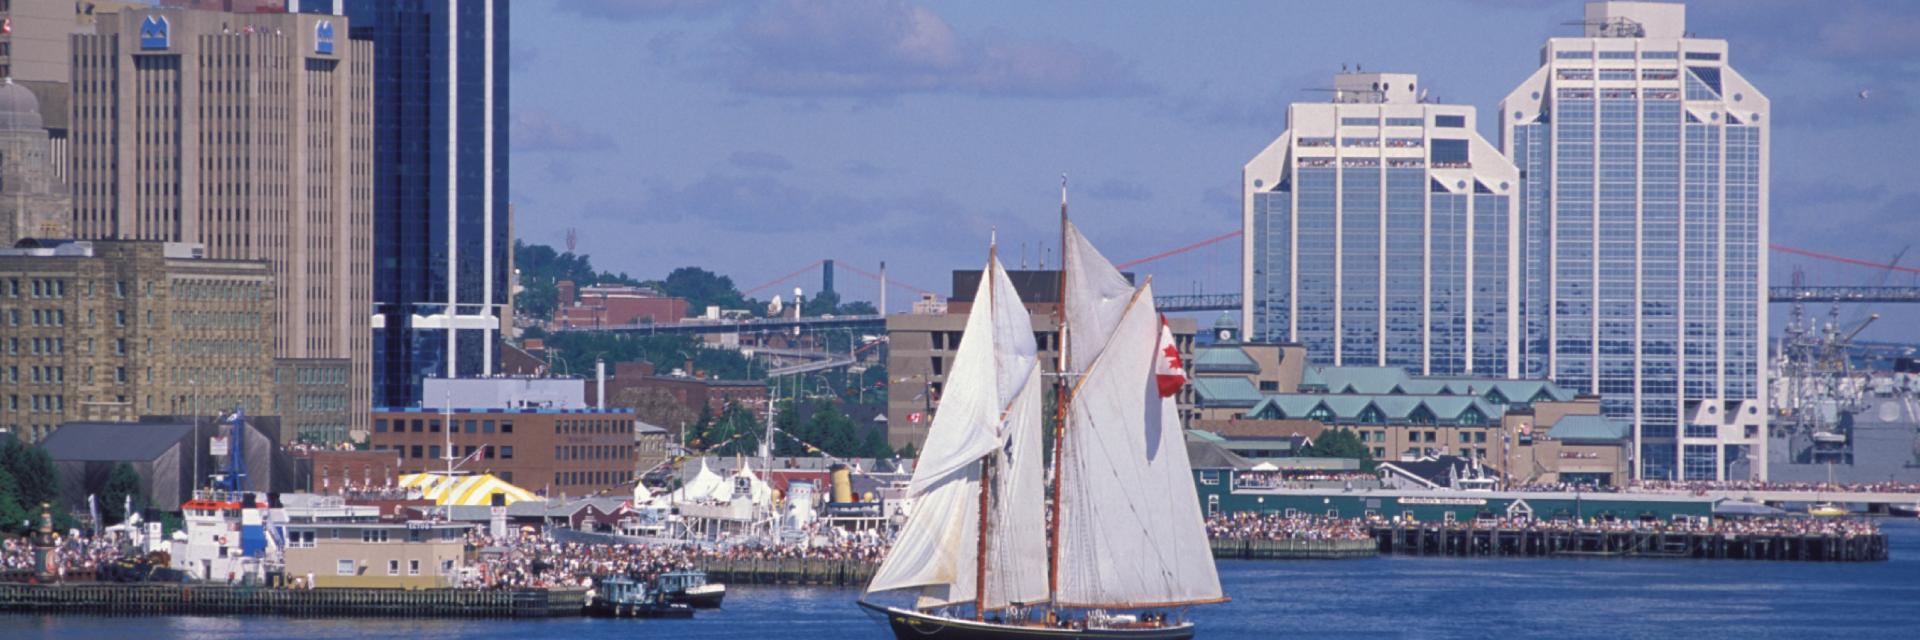 The Bluenose II sails in Halifax harbour with downtown buildings in the background.